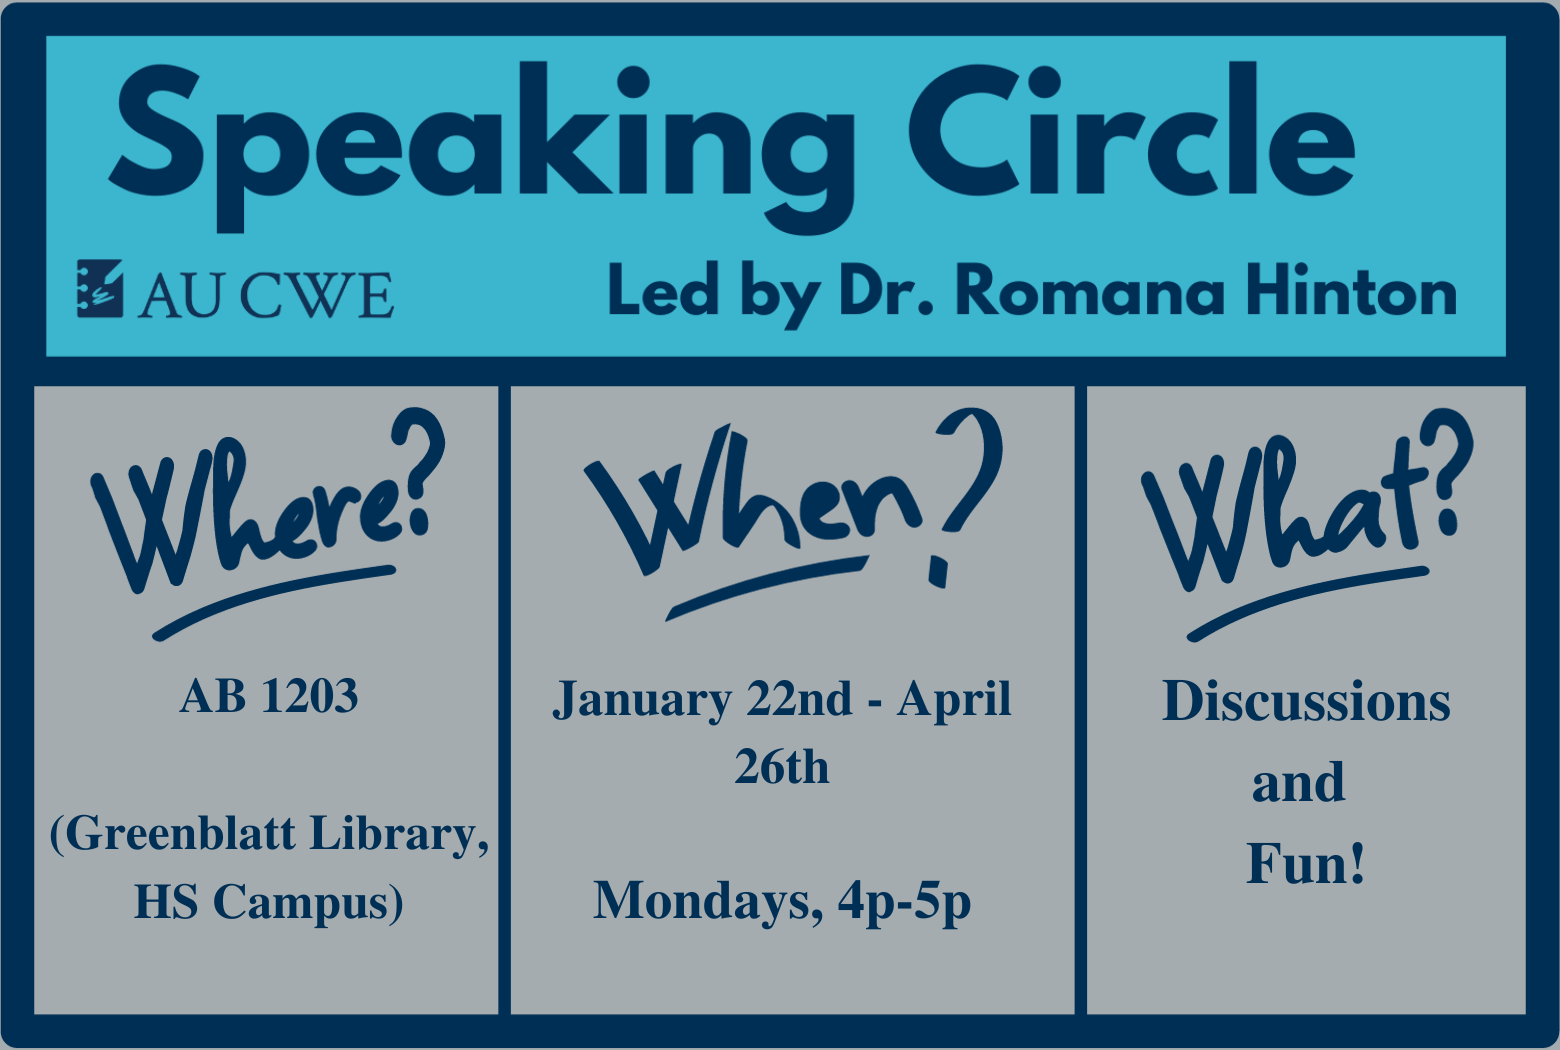 Speaking Circle meets in Greenblatt Library room 1203, Mondays from 4pm tp 5pm